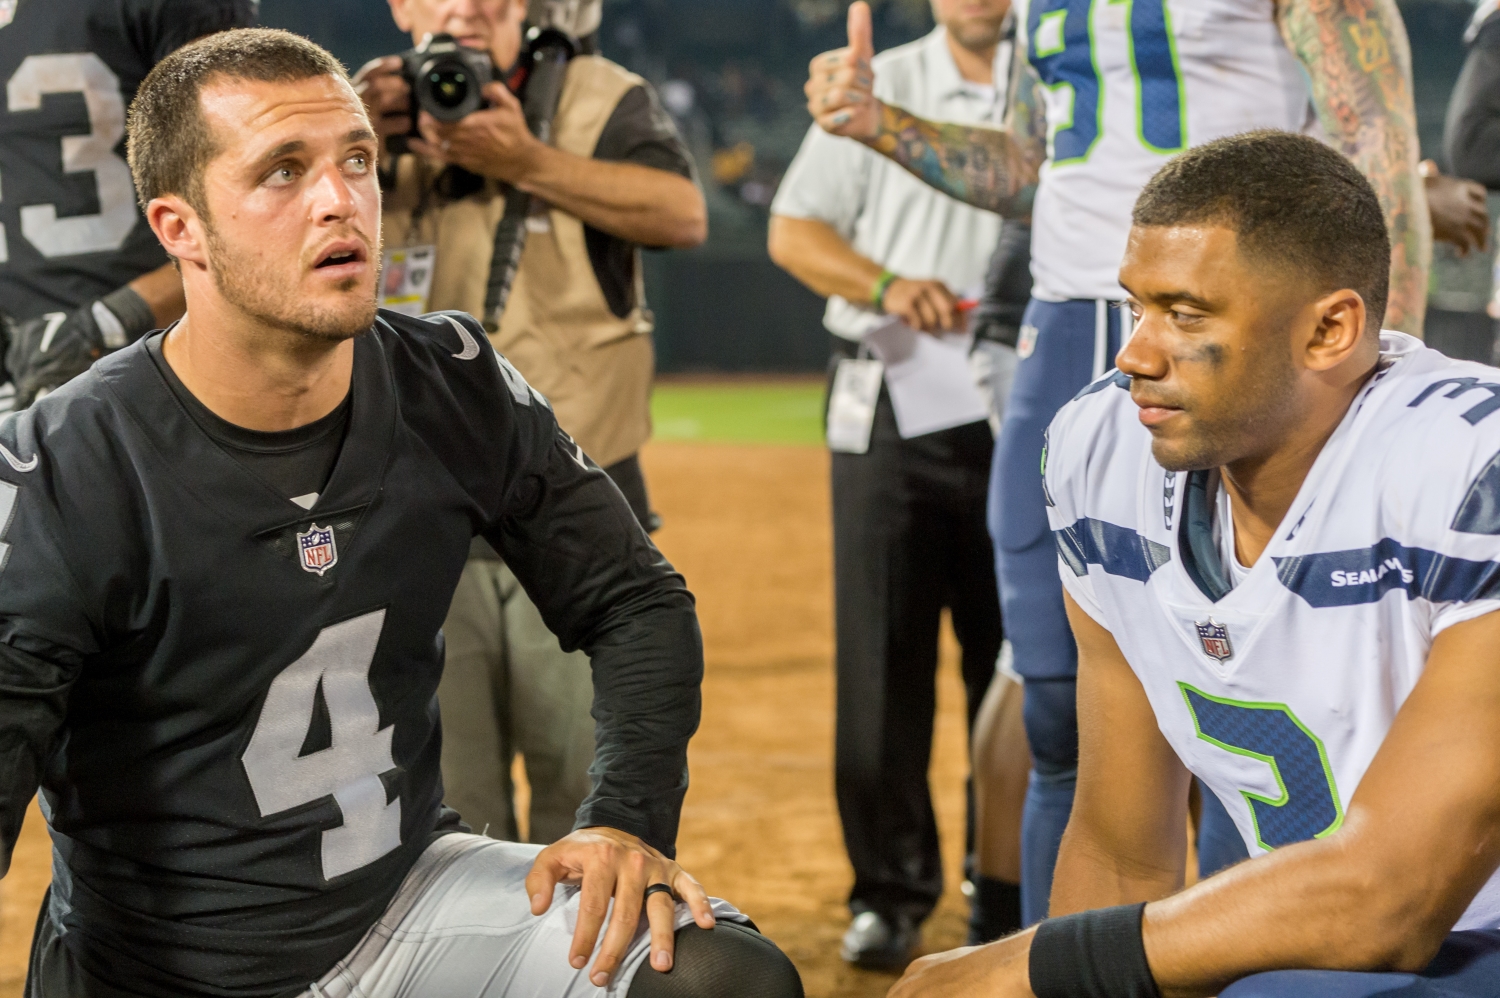 Derek Carr and Russell Wilson kneel in prayer following a game between the Raiders and the Seahawks in August 2017.